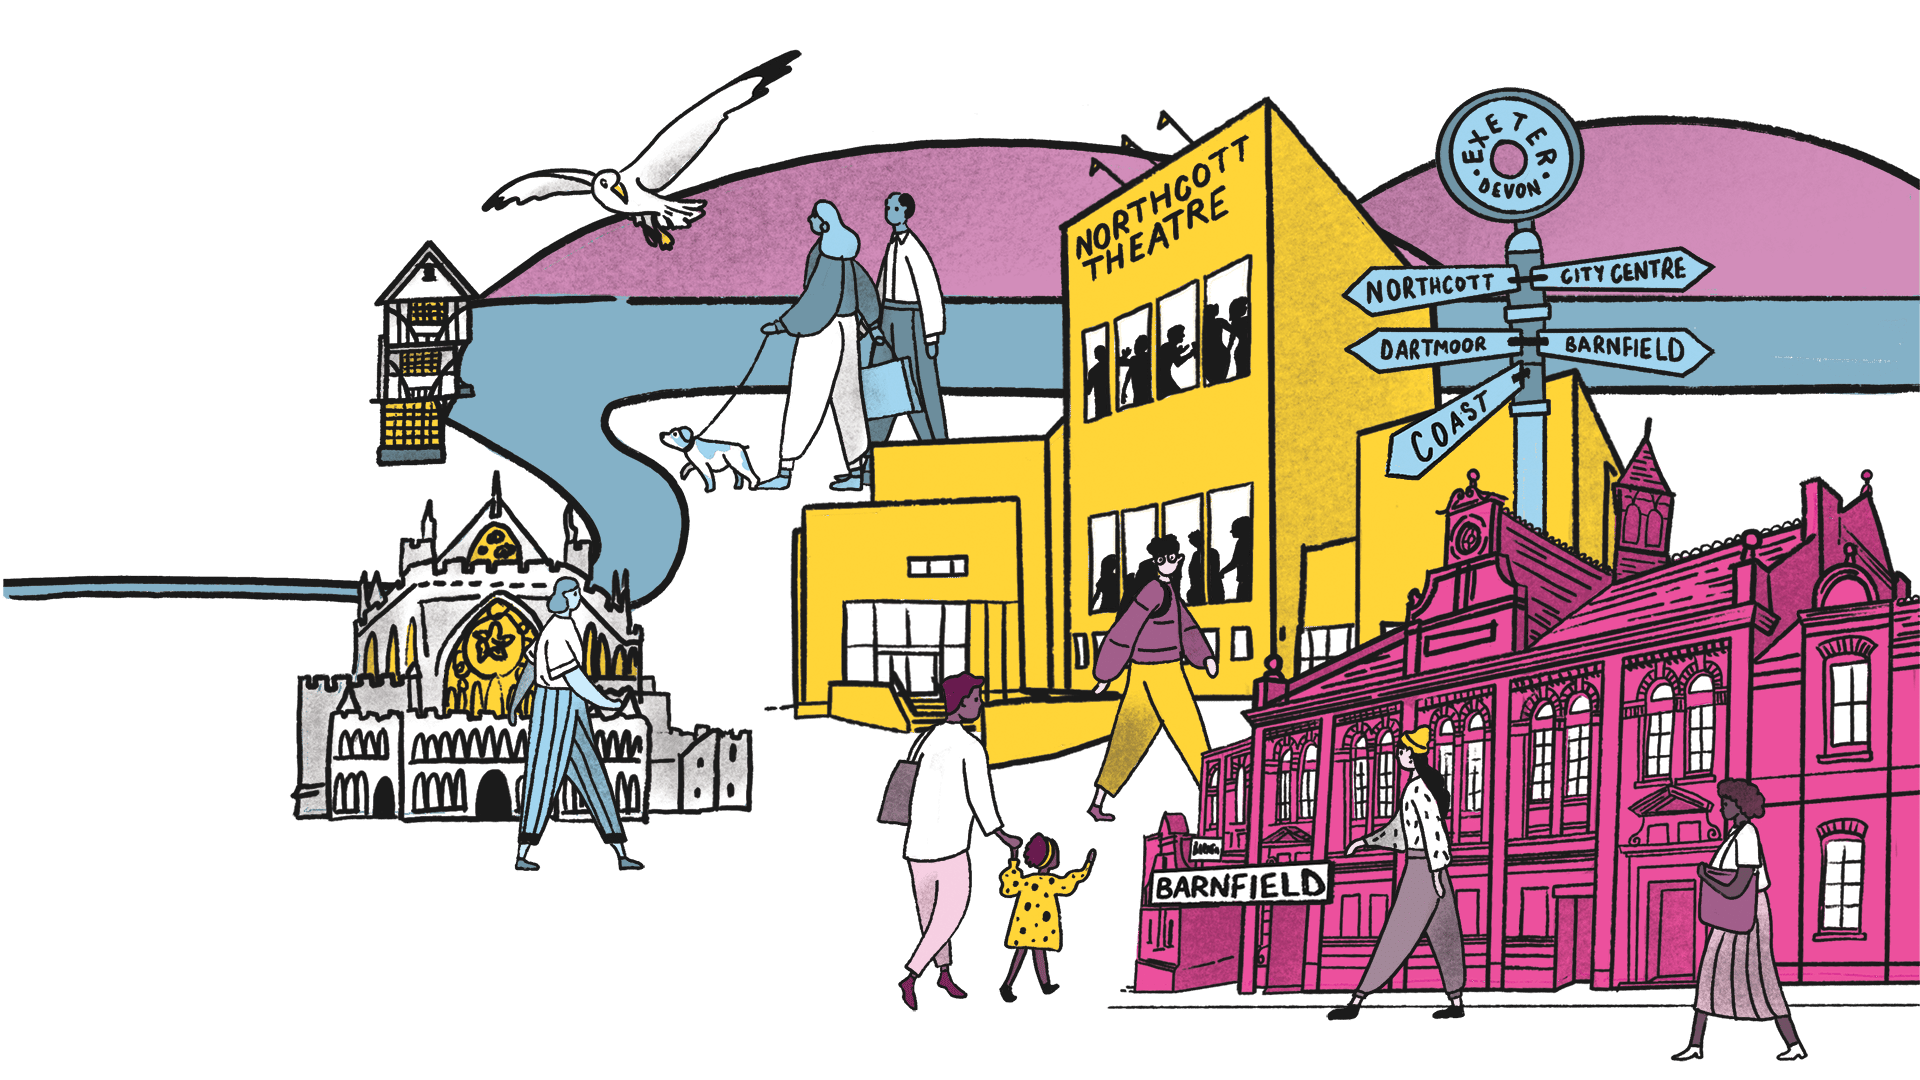 An illustration of Exeter's key landmarks, including Northcott Theatre, Barnfield Theatre, Exeter Cathedral and the house that moved